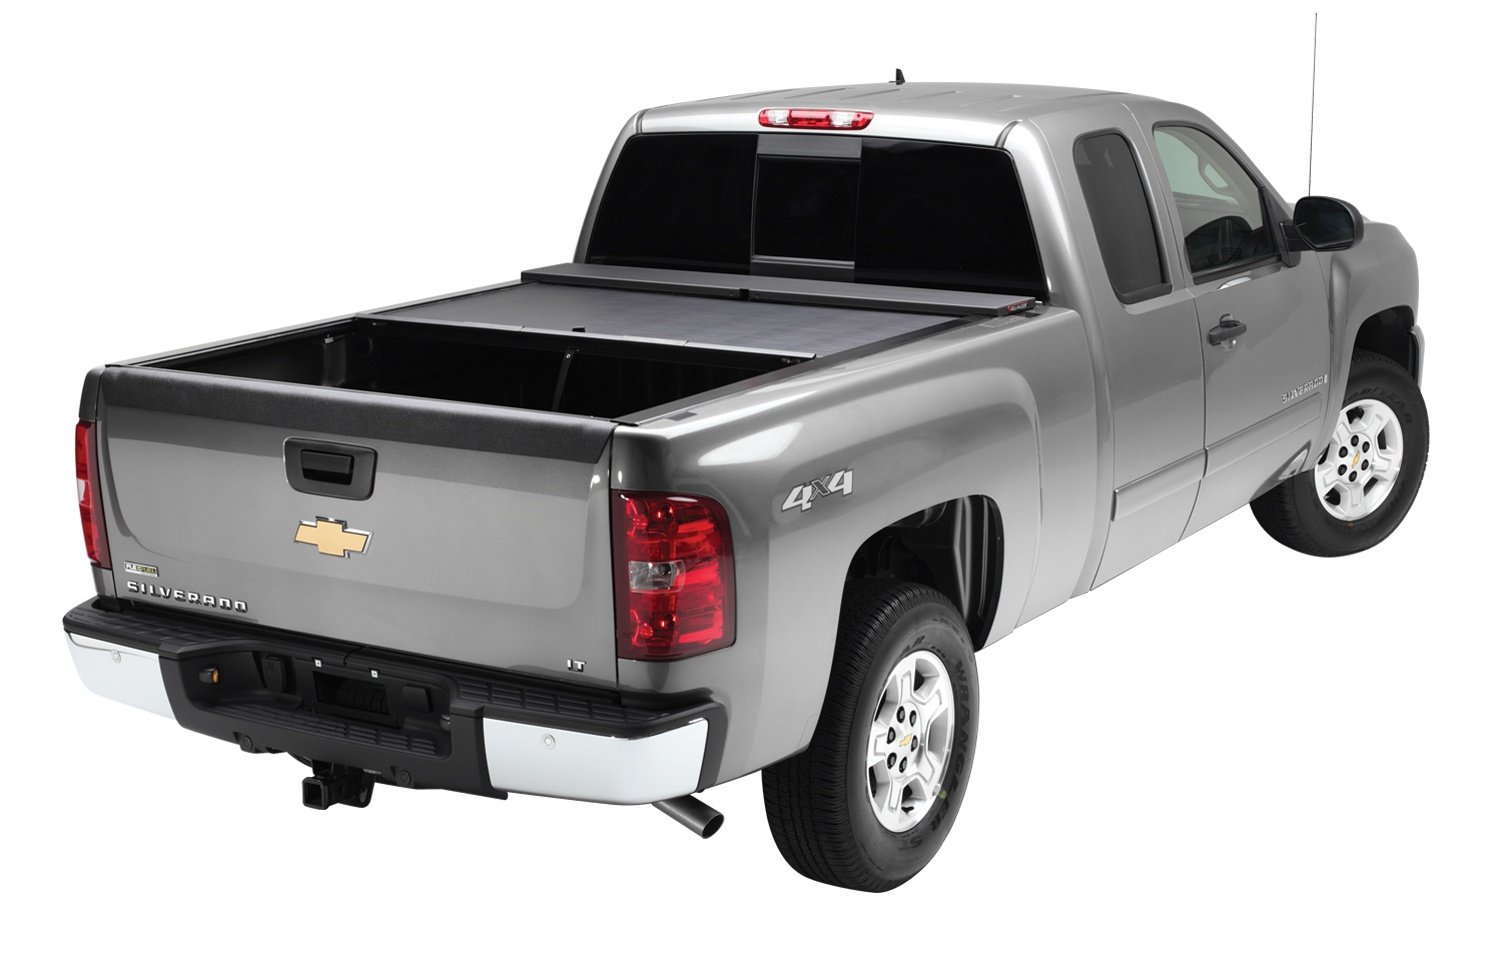 LG217M M-Series Locking Retractable Truck Bed Cover for 2007-2013 GM Silverado/Sierra [8 ft. Bed]